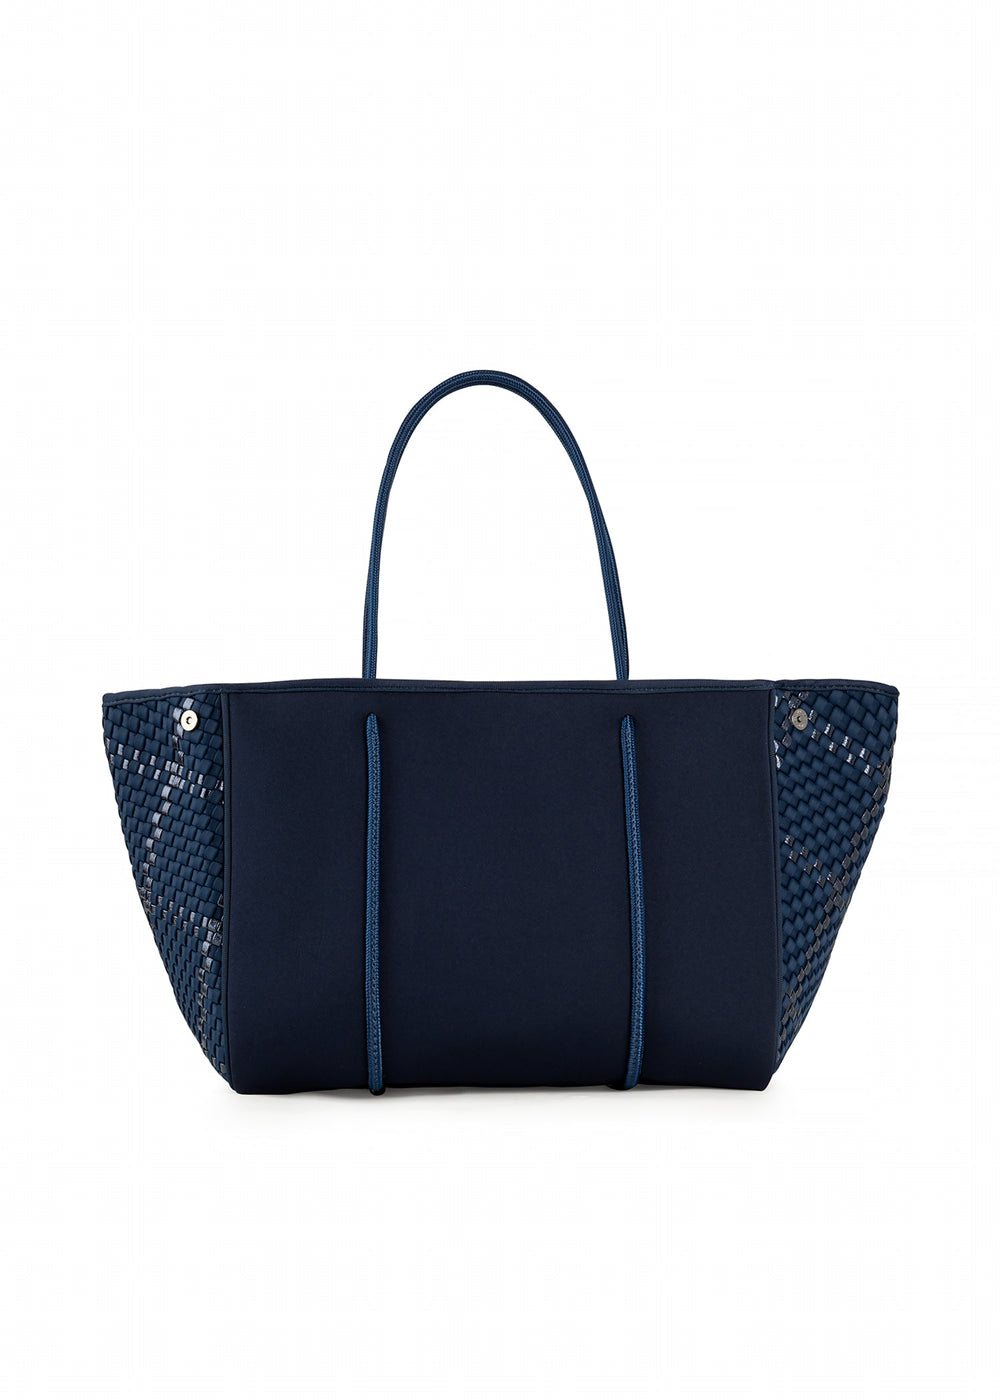 The Greyson Tote